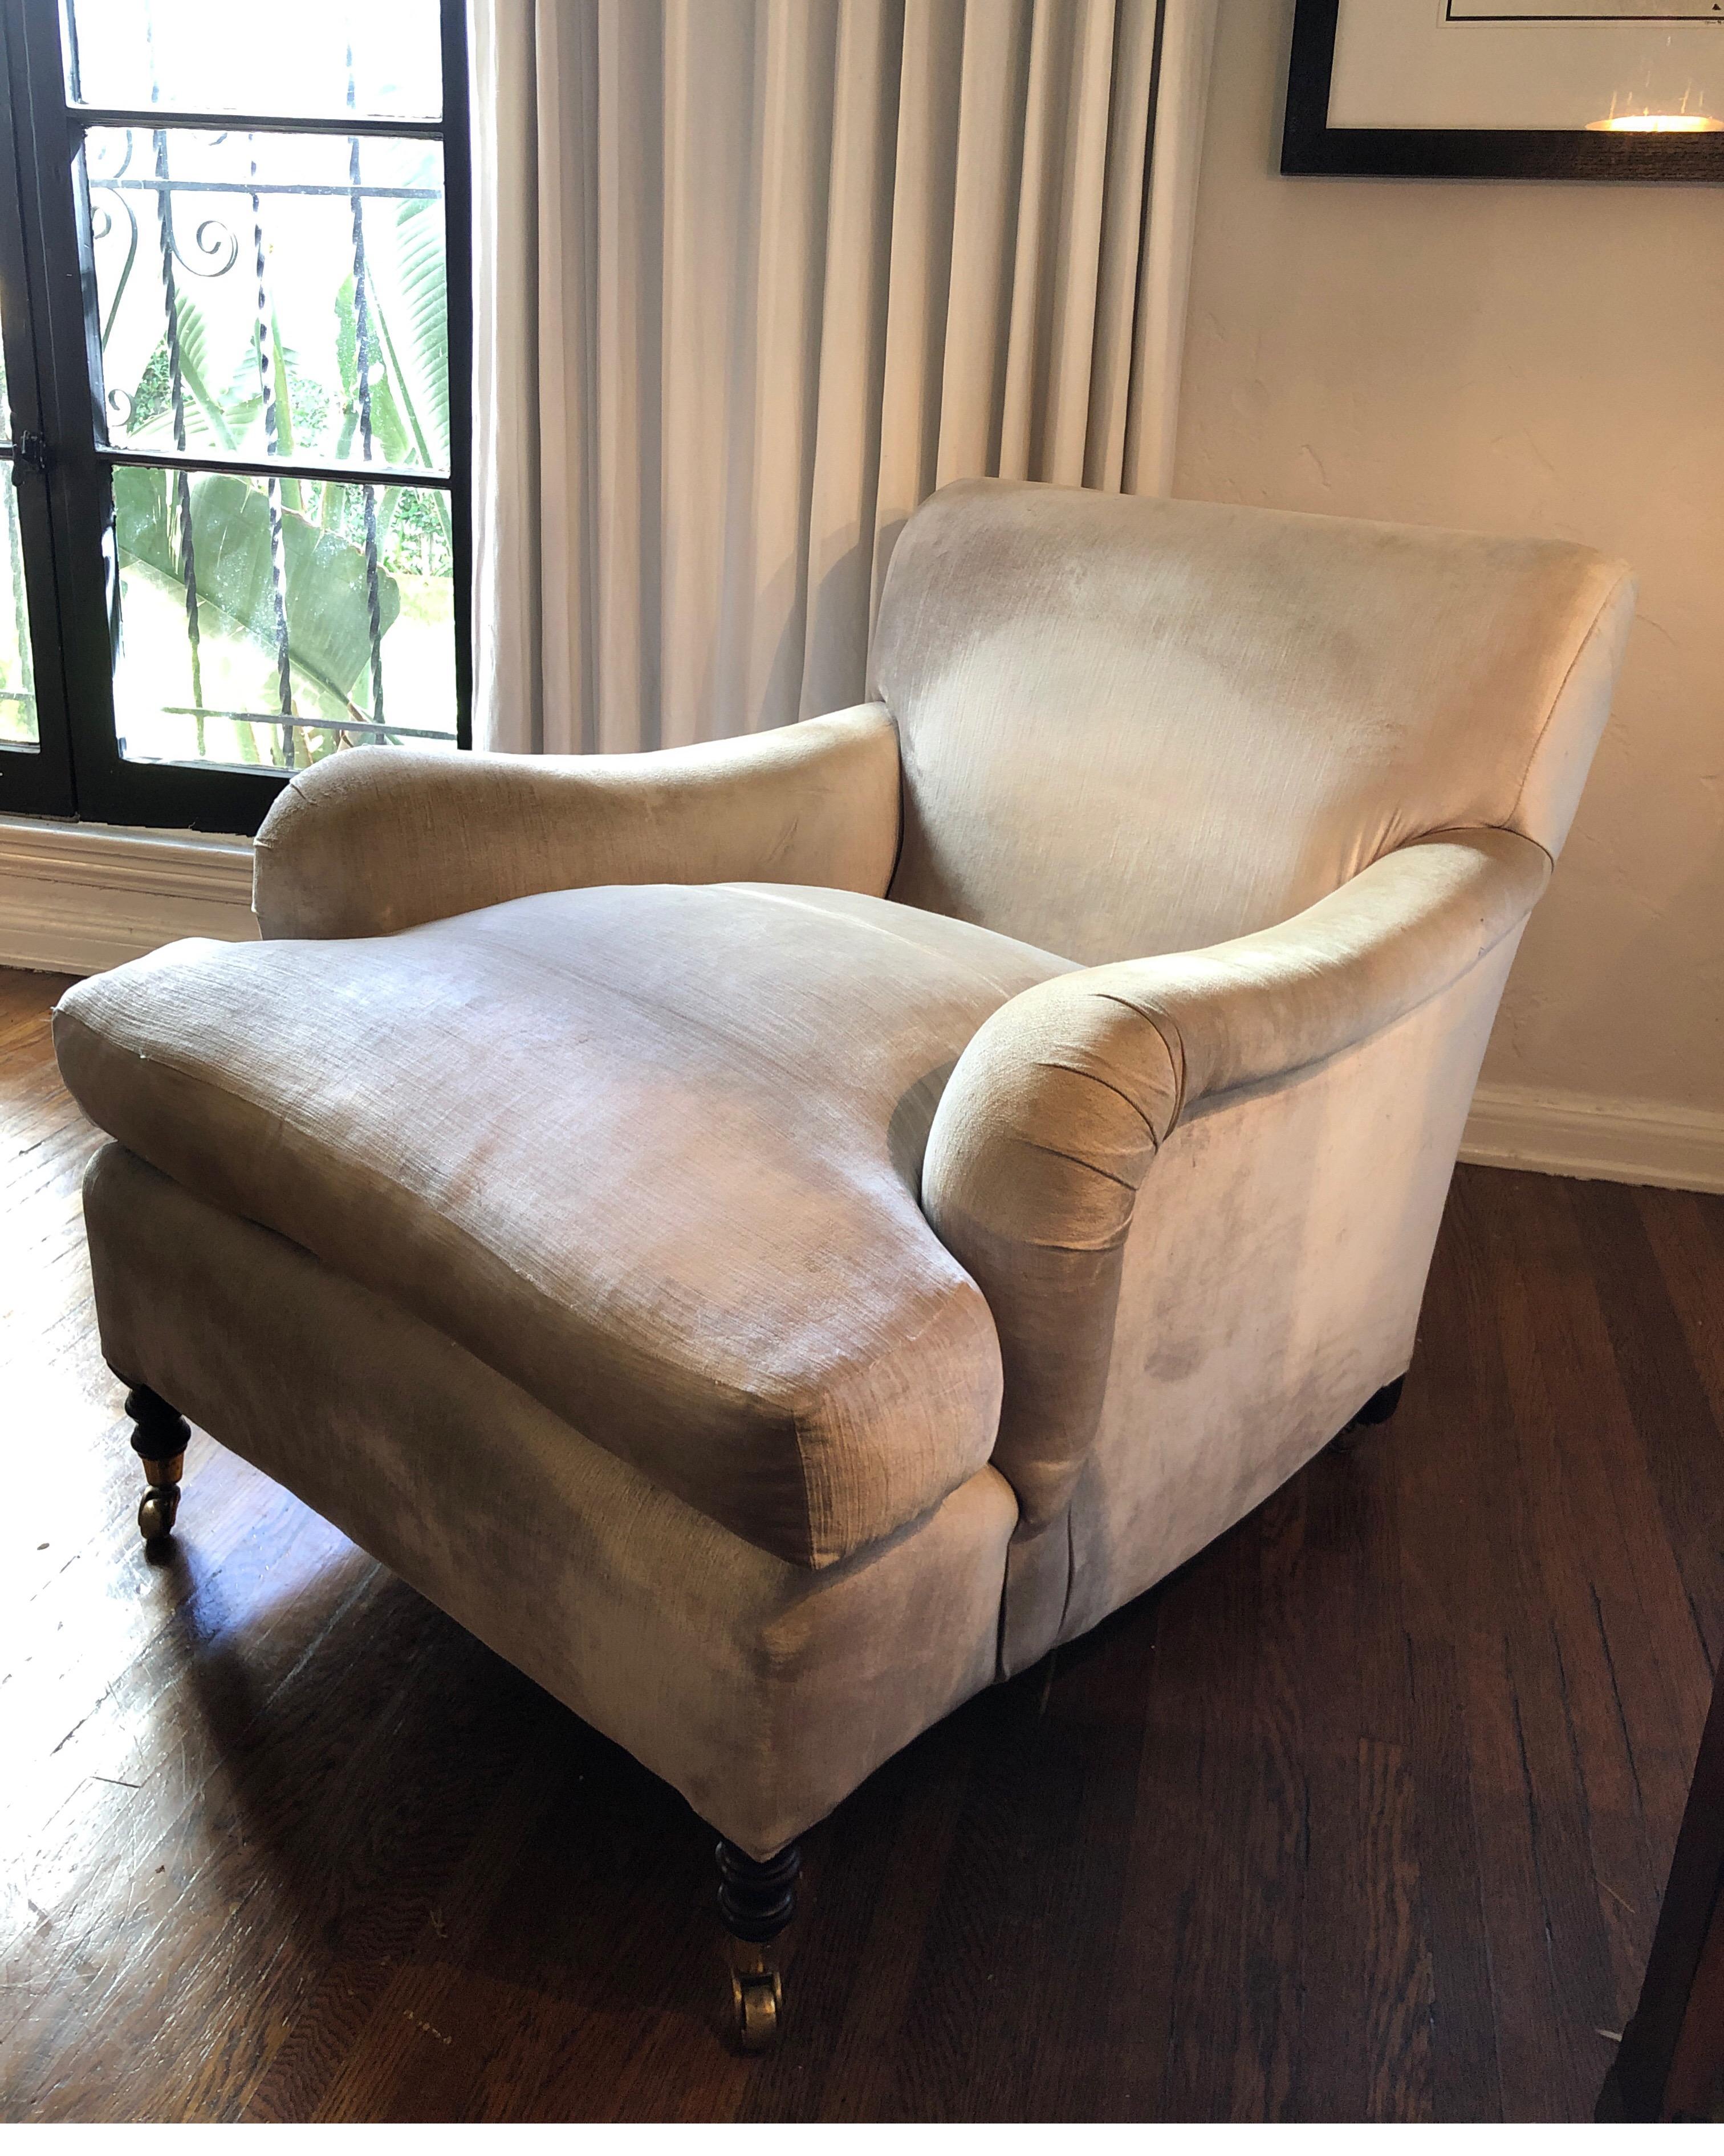 Pair of deep handmade George Smith standard arm chairs. Cushions are 100% down w/horse hair frame. Brass castors on front and rear. Chairs have a tight back to give a more modern/contemporary style.

Custom made in 1998 and shipped from England to